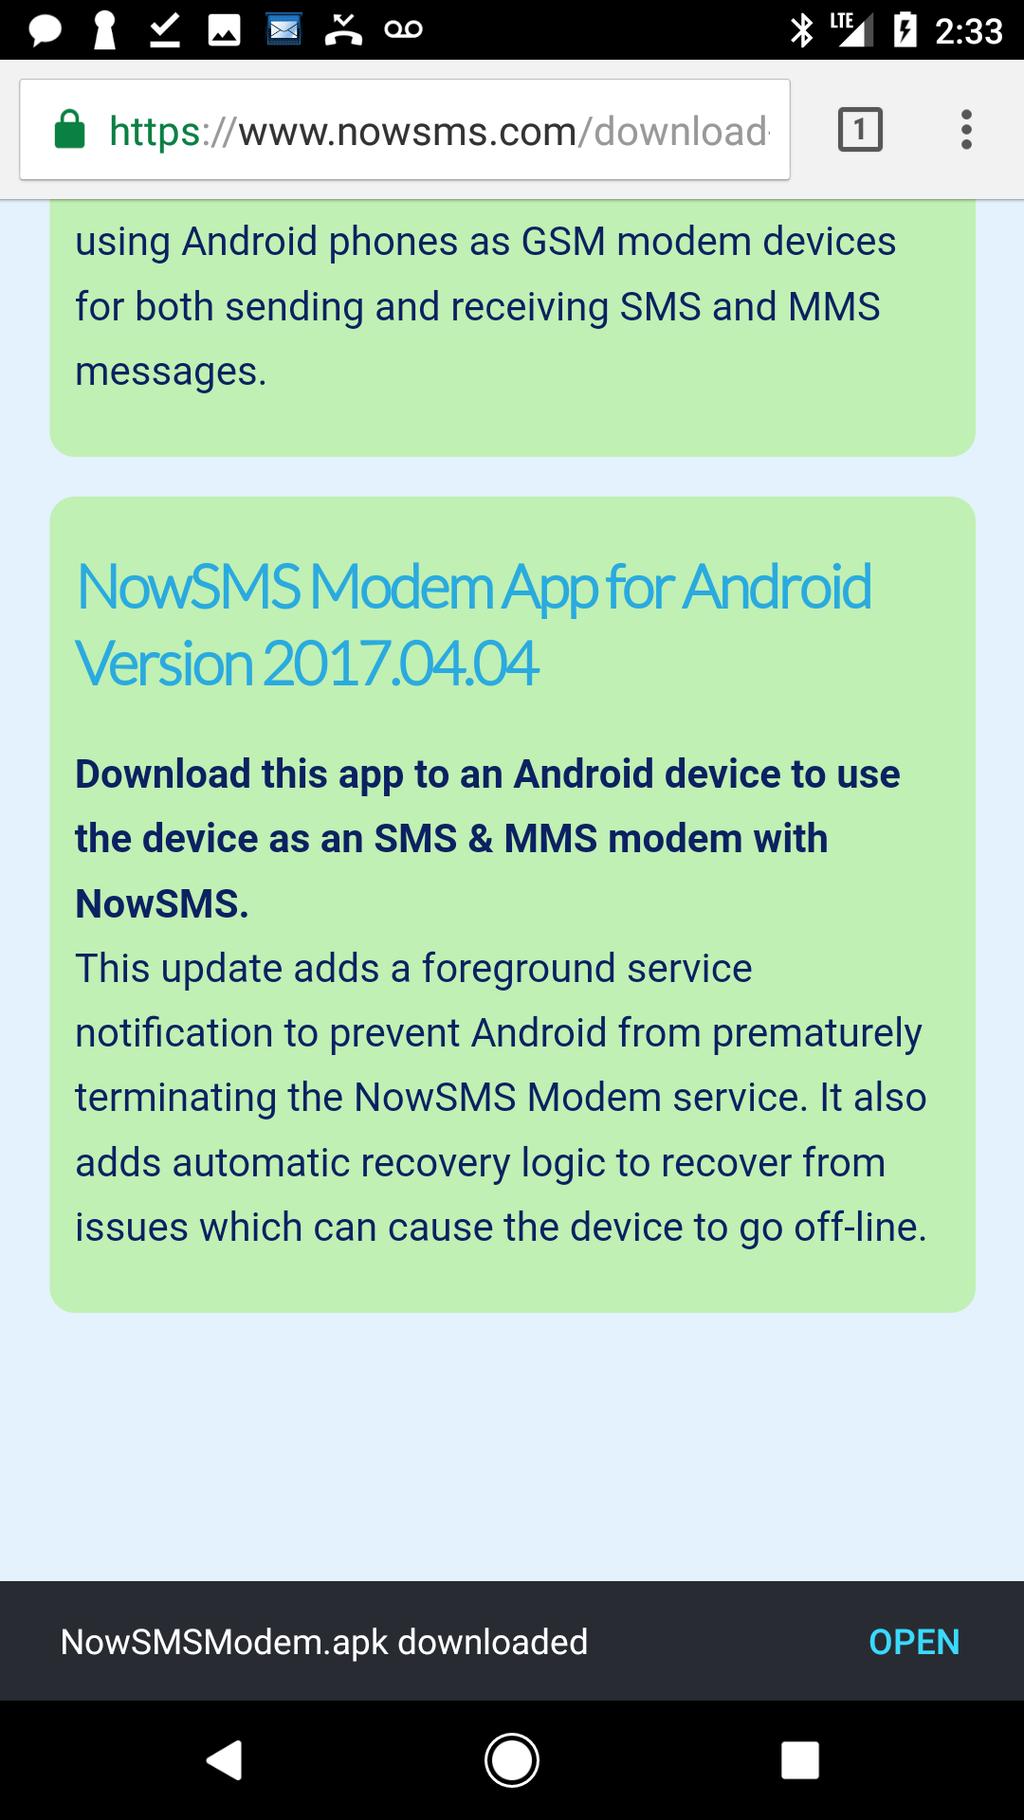 Step 2: Open the web browser or Chrome and go to the download page on the NowSMS website: https://www.nowsms.